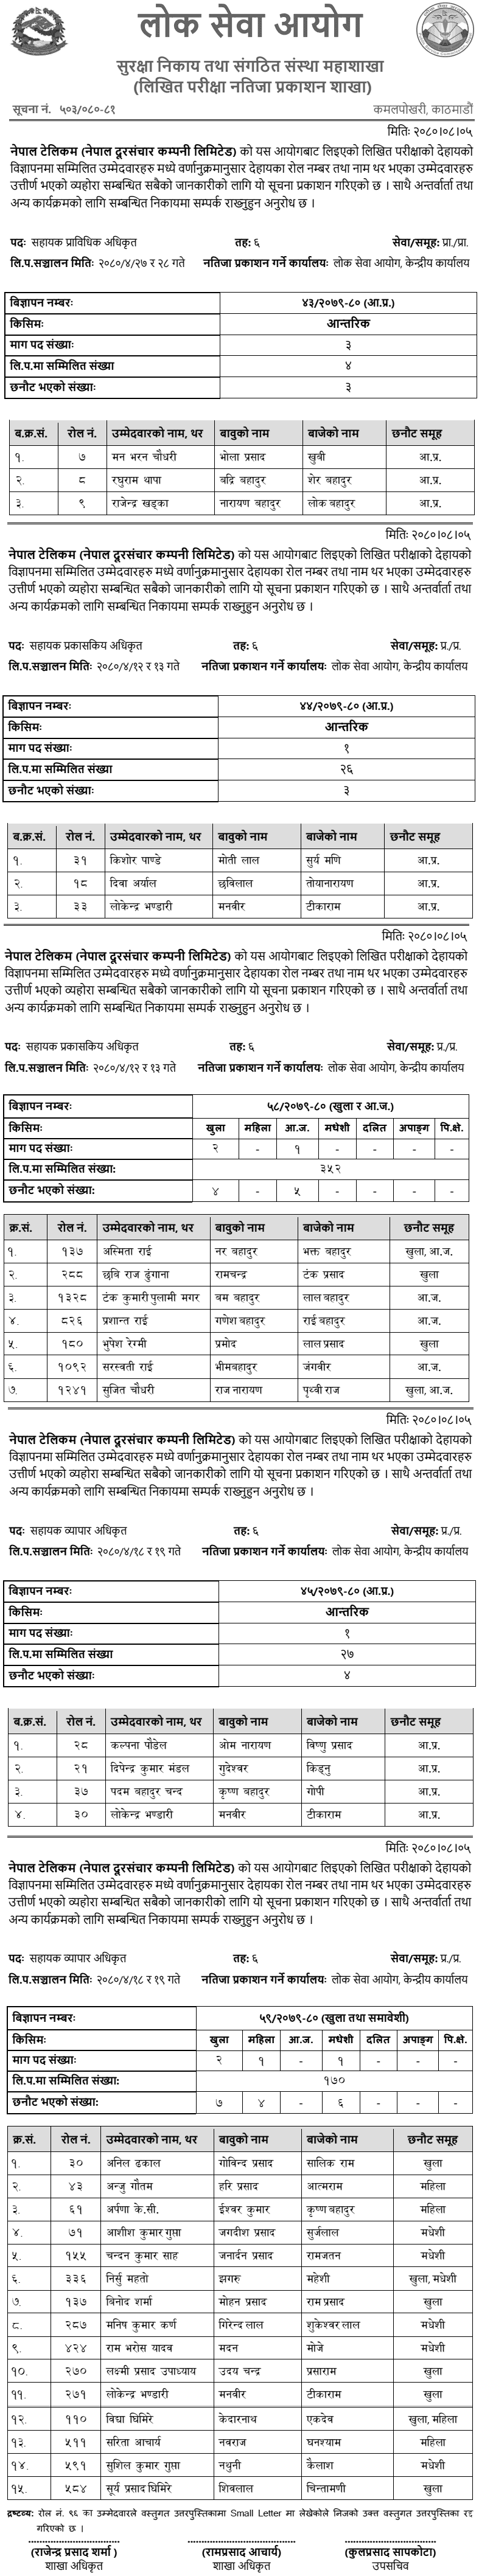 Nepal Telecom Written Exam Result of 6th Level Various Posts 2080